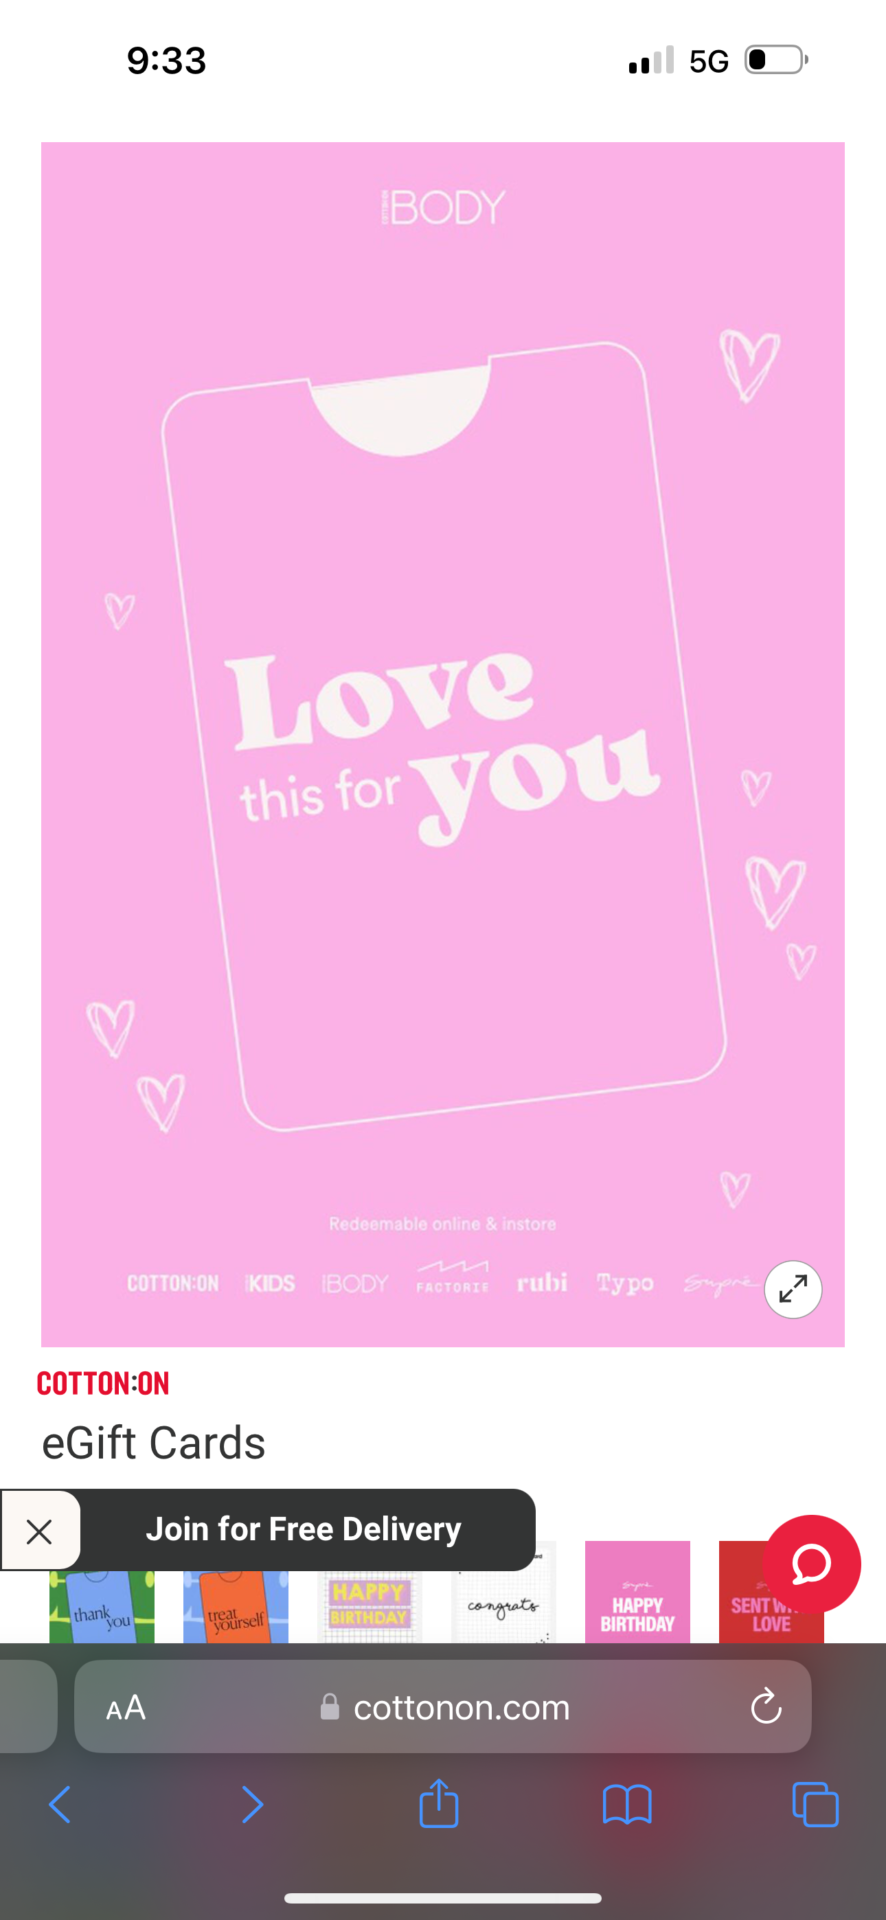 Cotton On Body GiftCard